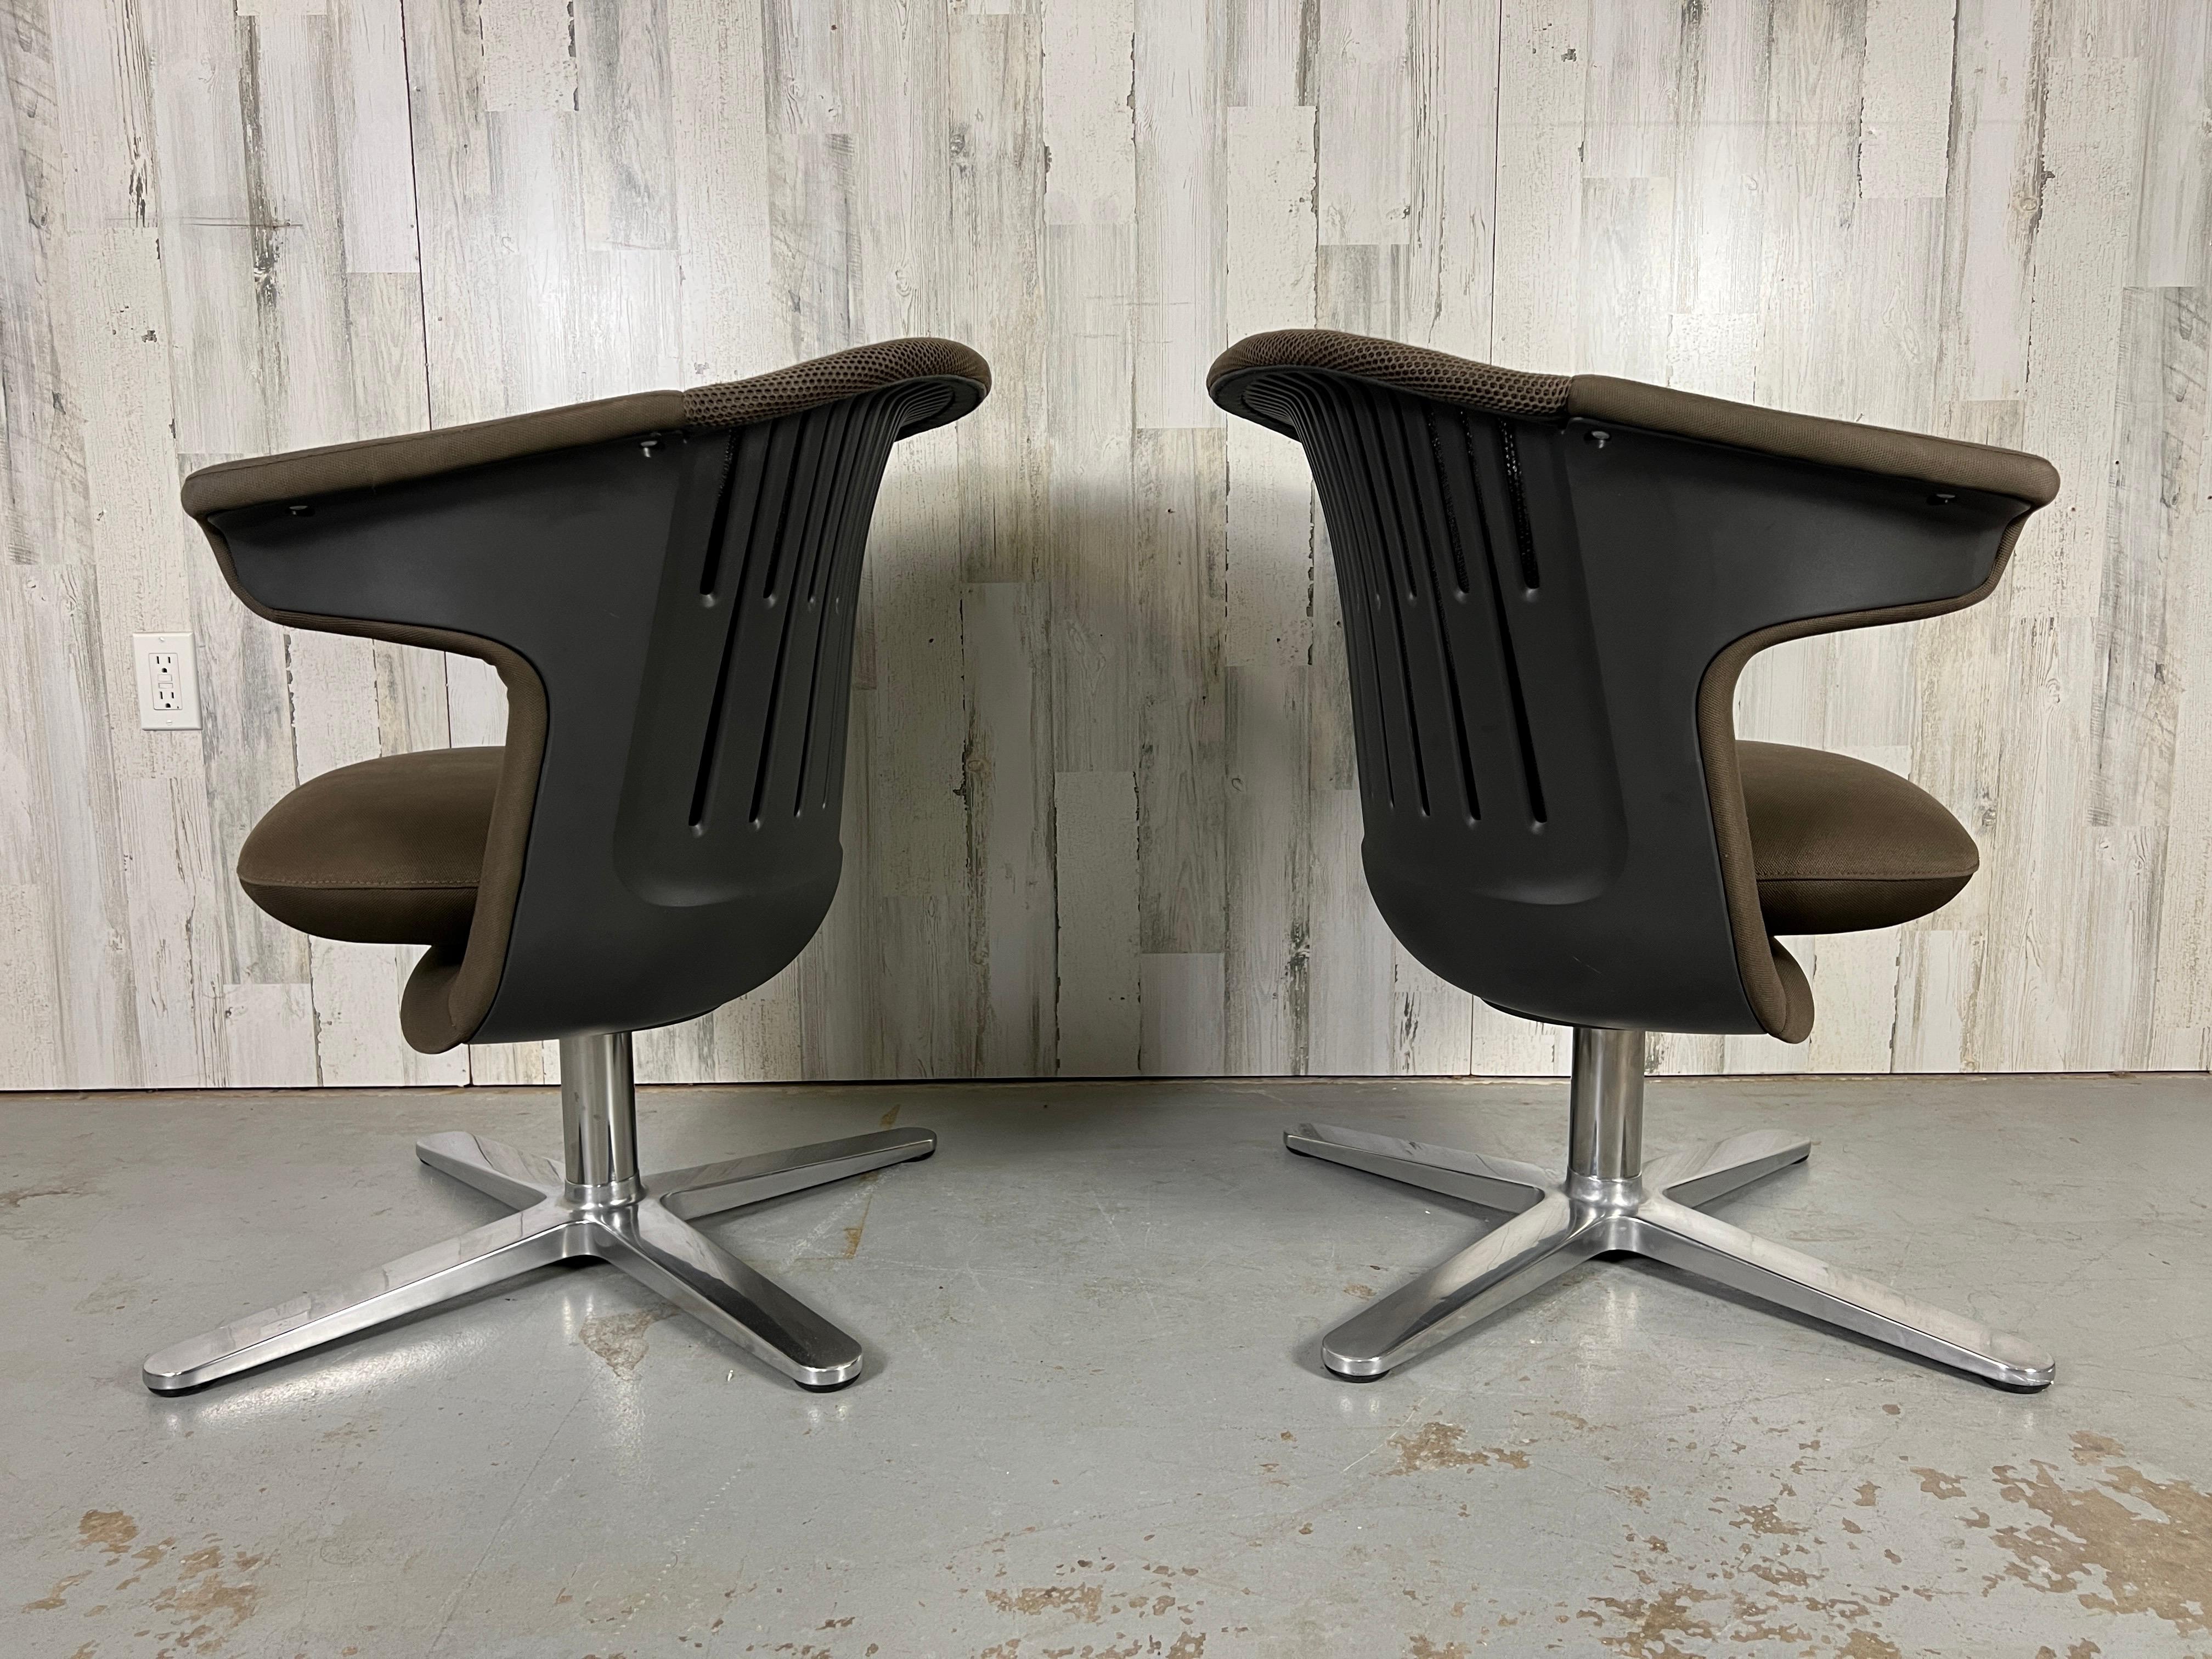 Steelcase swivel plastic shell chair with upholstered swivel seat and back.
The four prong polished aluminum base is very attractive and makes these chairs very versatile for home or office. Sold a a pair ,Two pairs available.
   